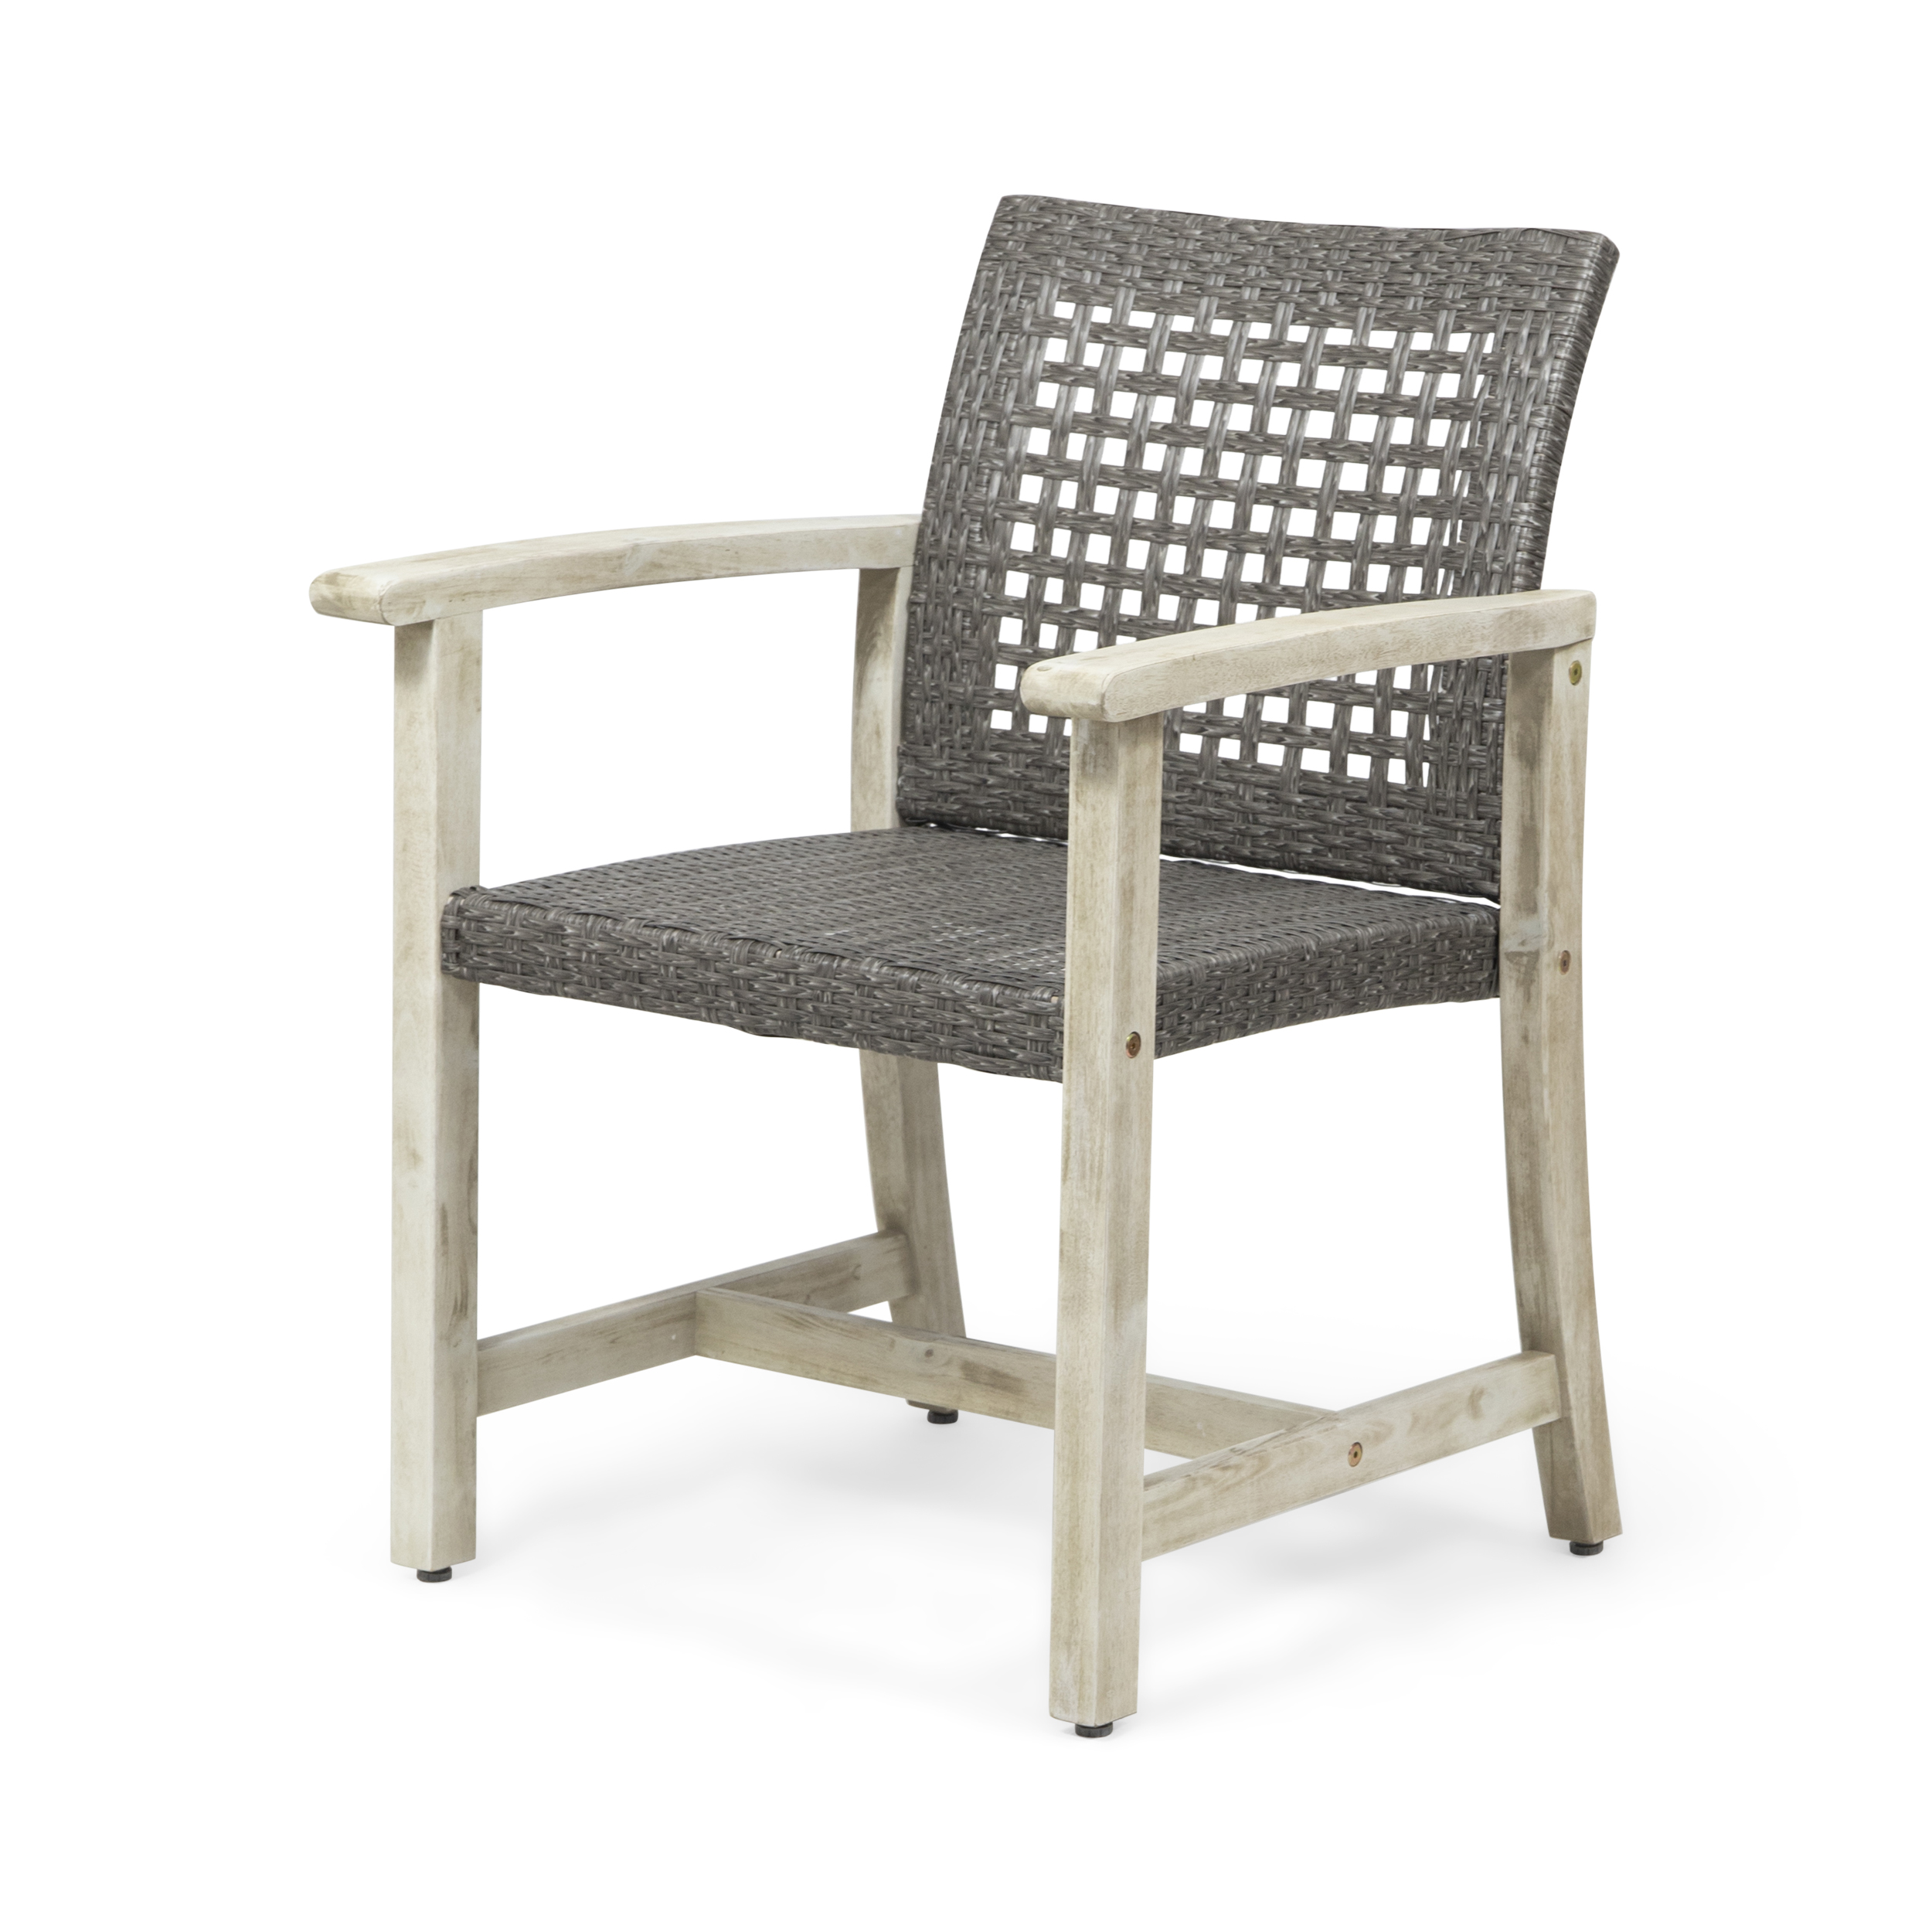 GDF Studio Beacher Outdoor Acacia Wood and Wicker Dining Chair (Set of 2), Light Gray Wash and Mix Black - image 4 of 11